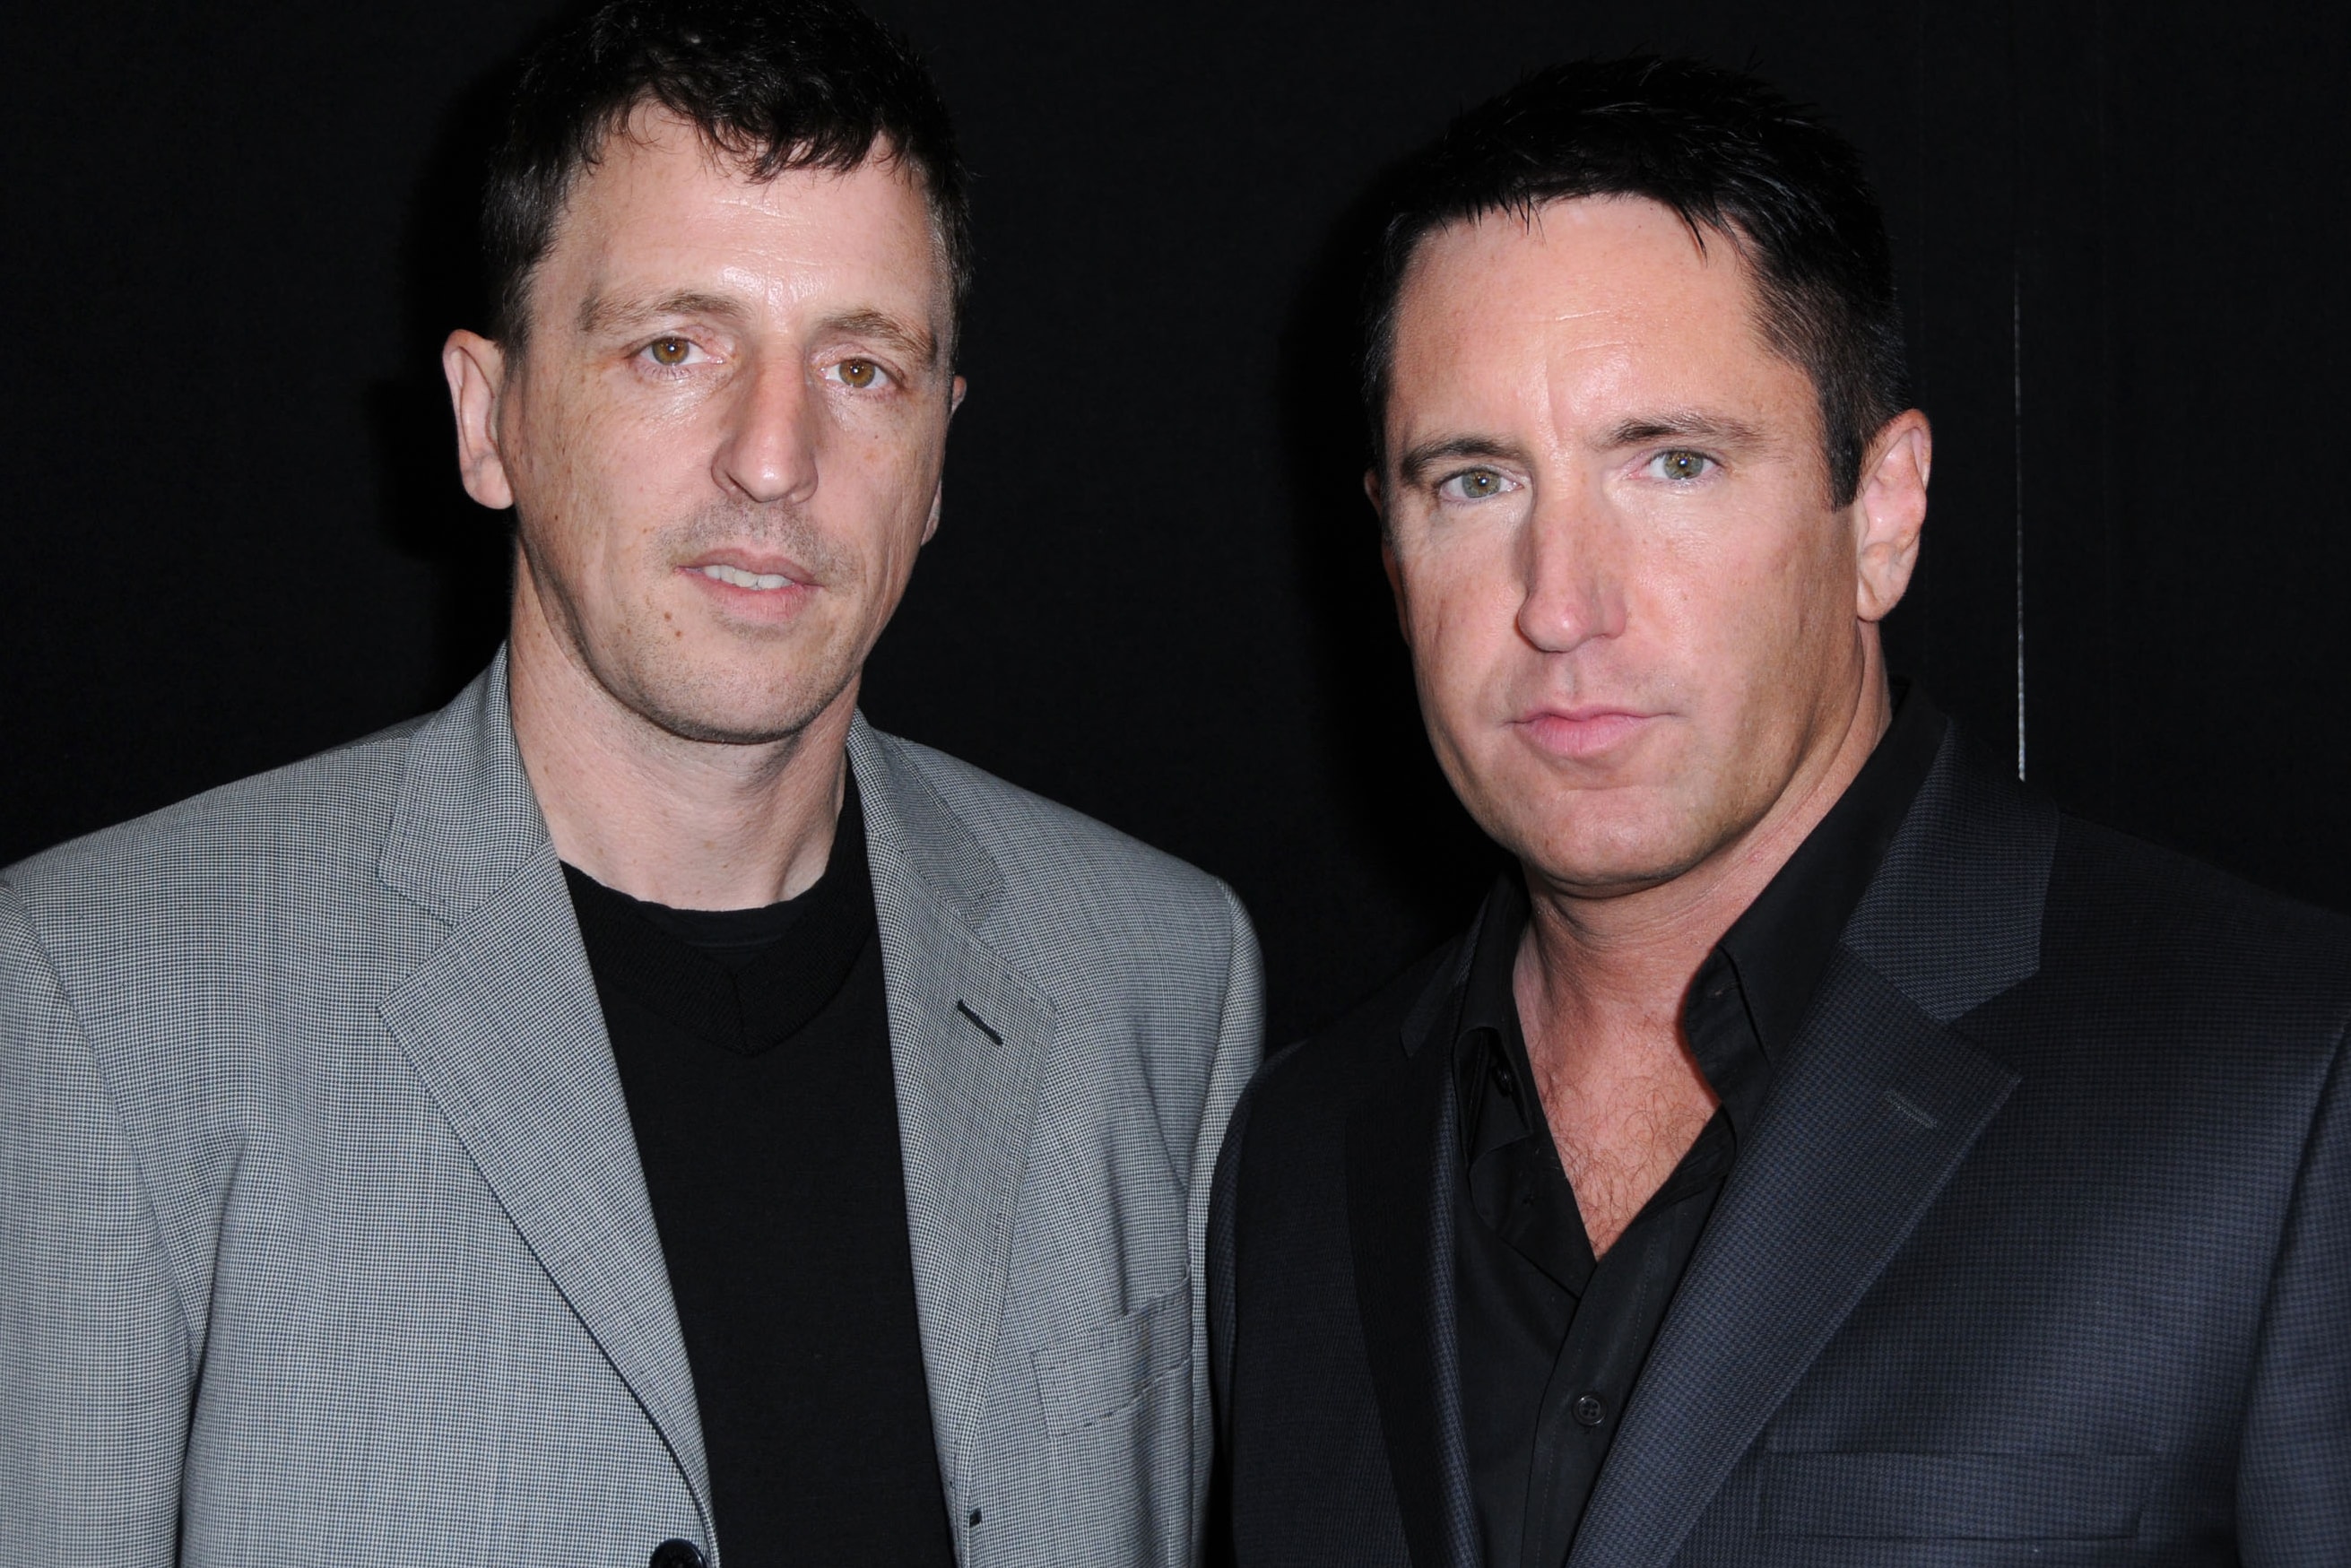 Trent Reznor & Atticus Ross to Score David Fincher's 'Mank' film 1940s period film instruments soundtrack nin nine inch nails gary oldman the woman in the window 